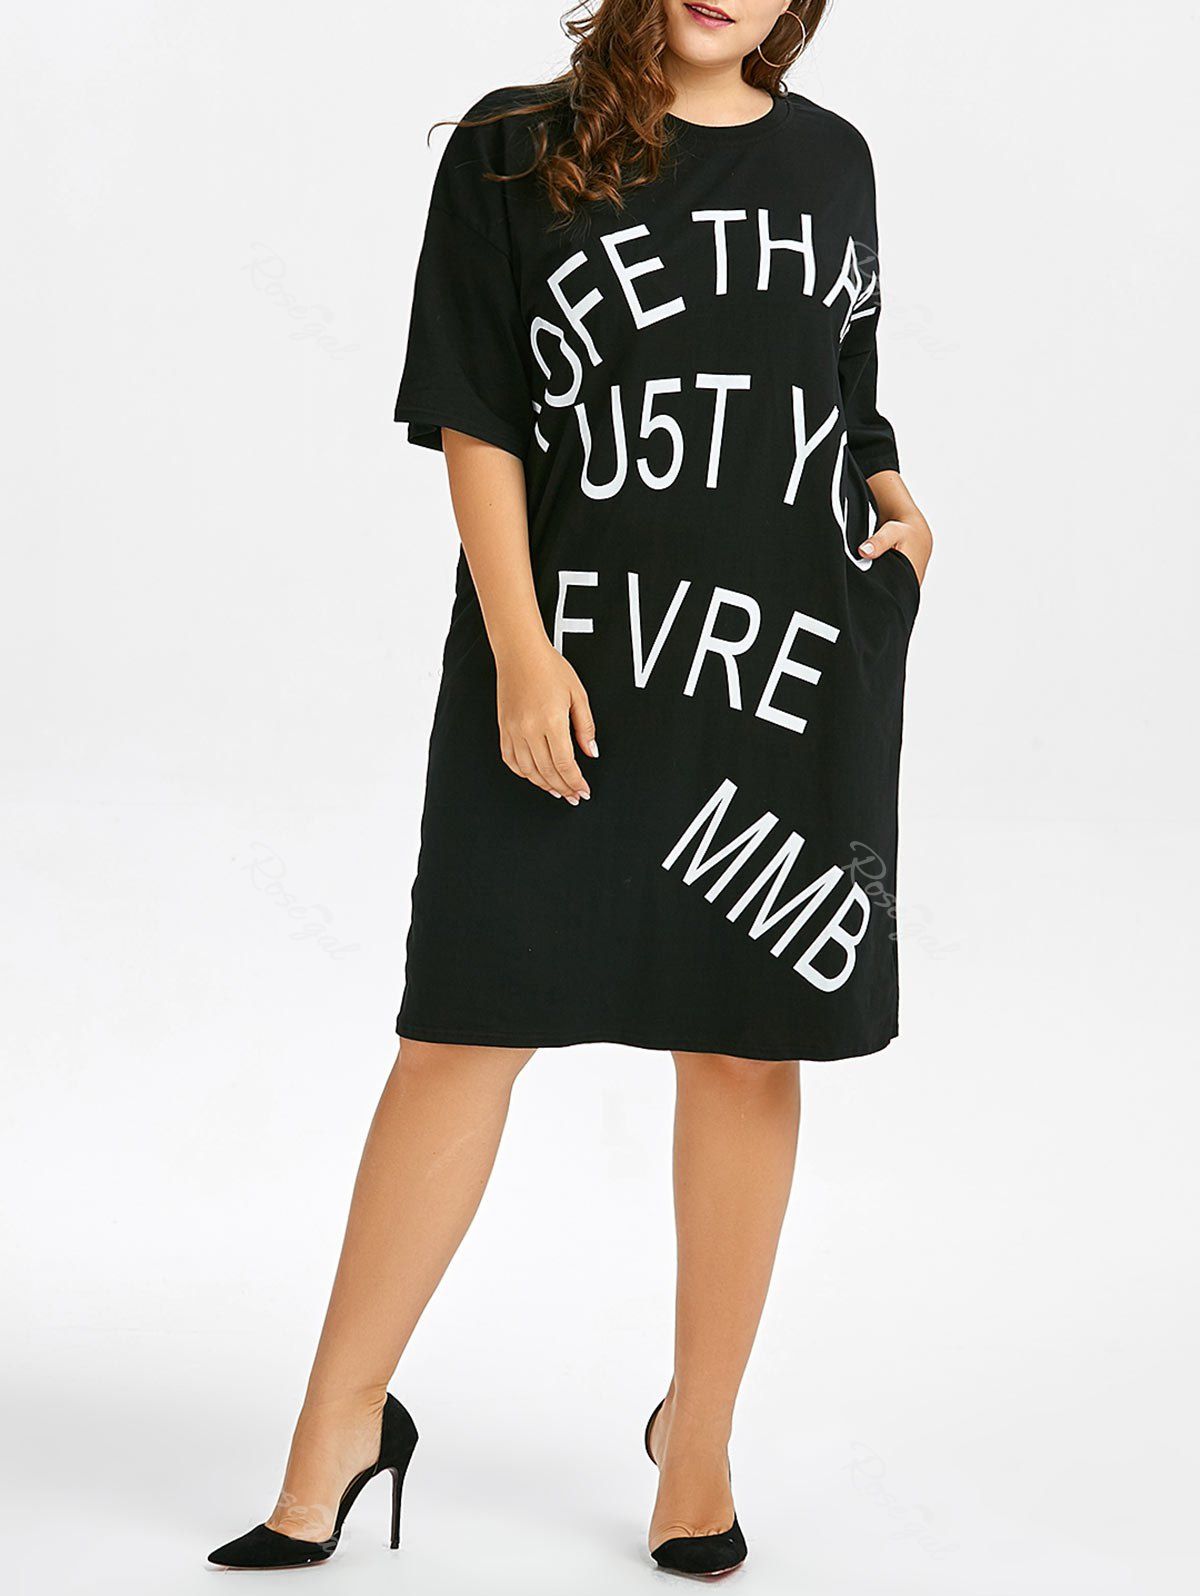 Plus Size Graphic Tee Dress Discount ...